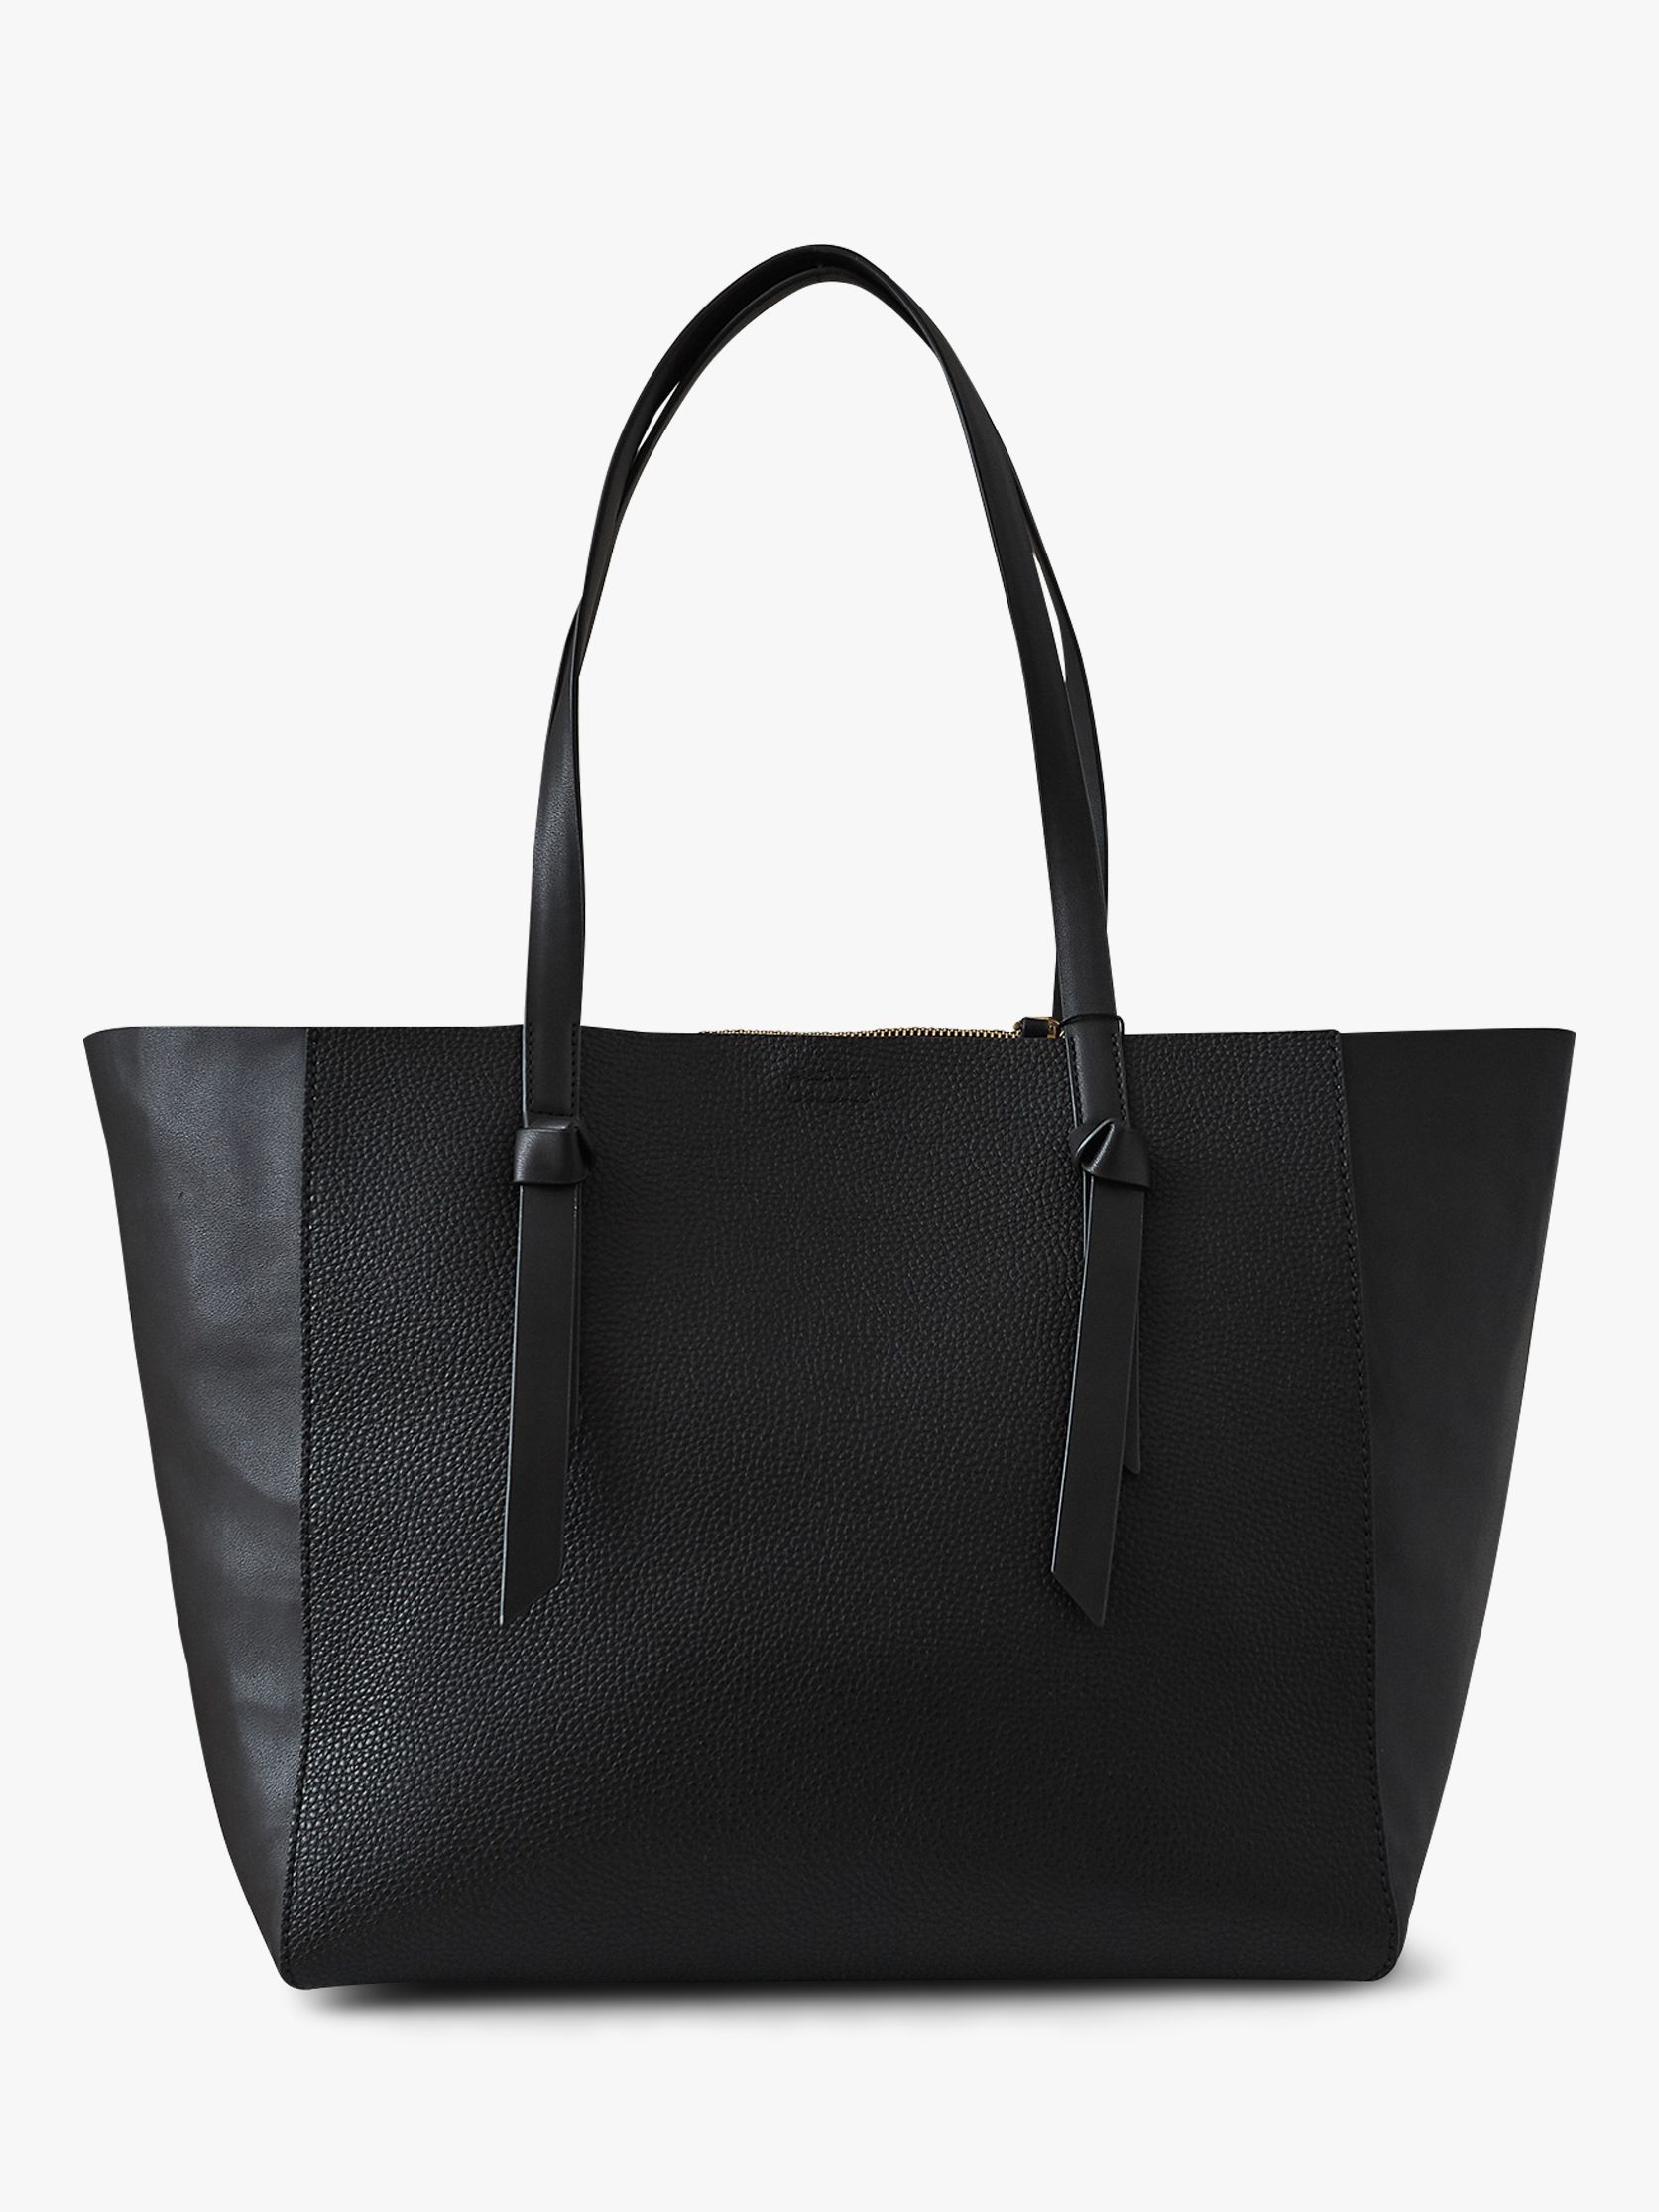 Reiss Kate Knot Contrast Panel Tote Bag